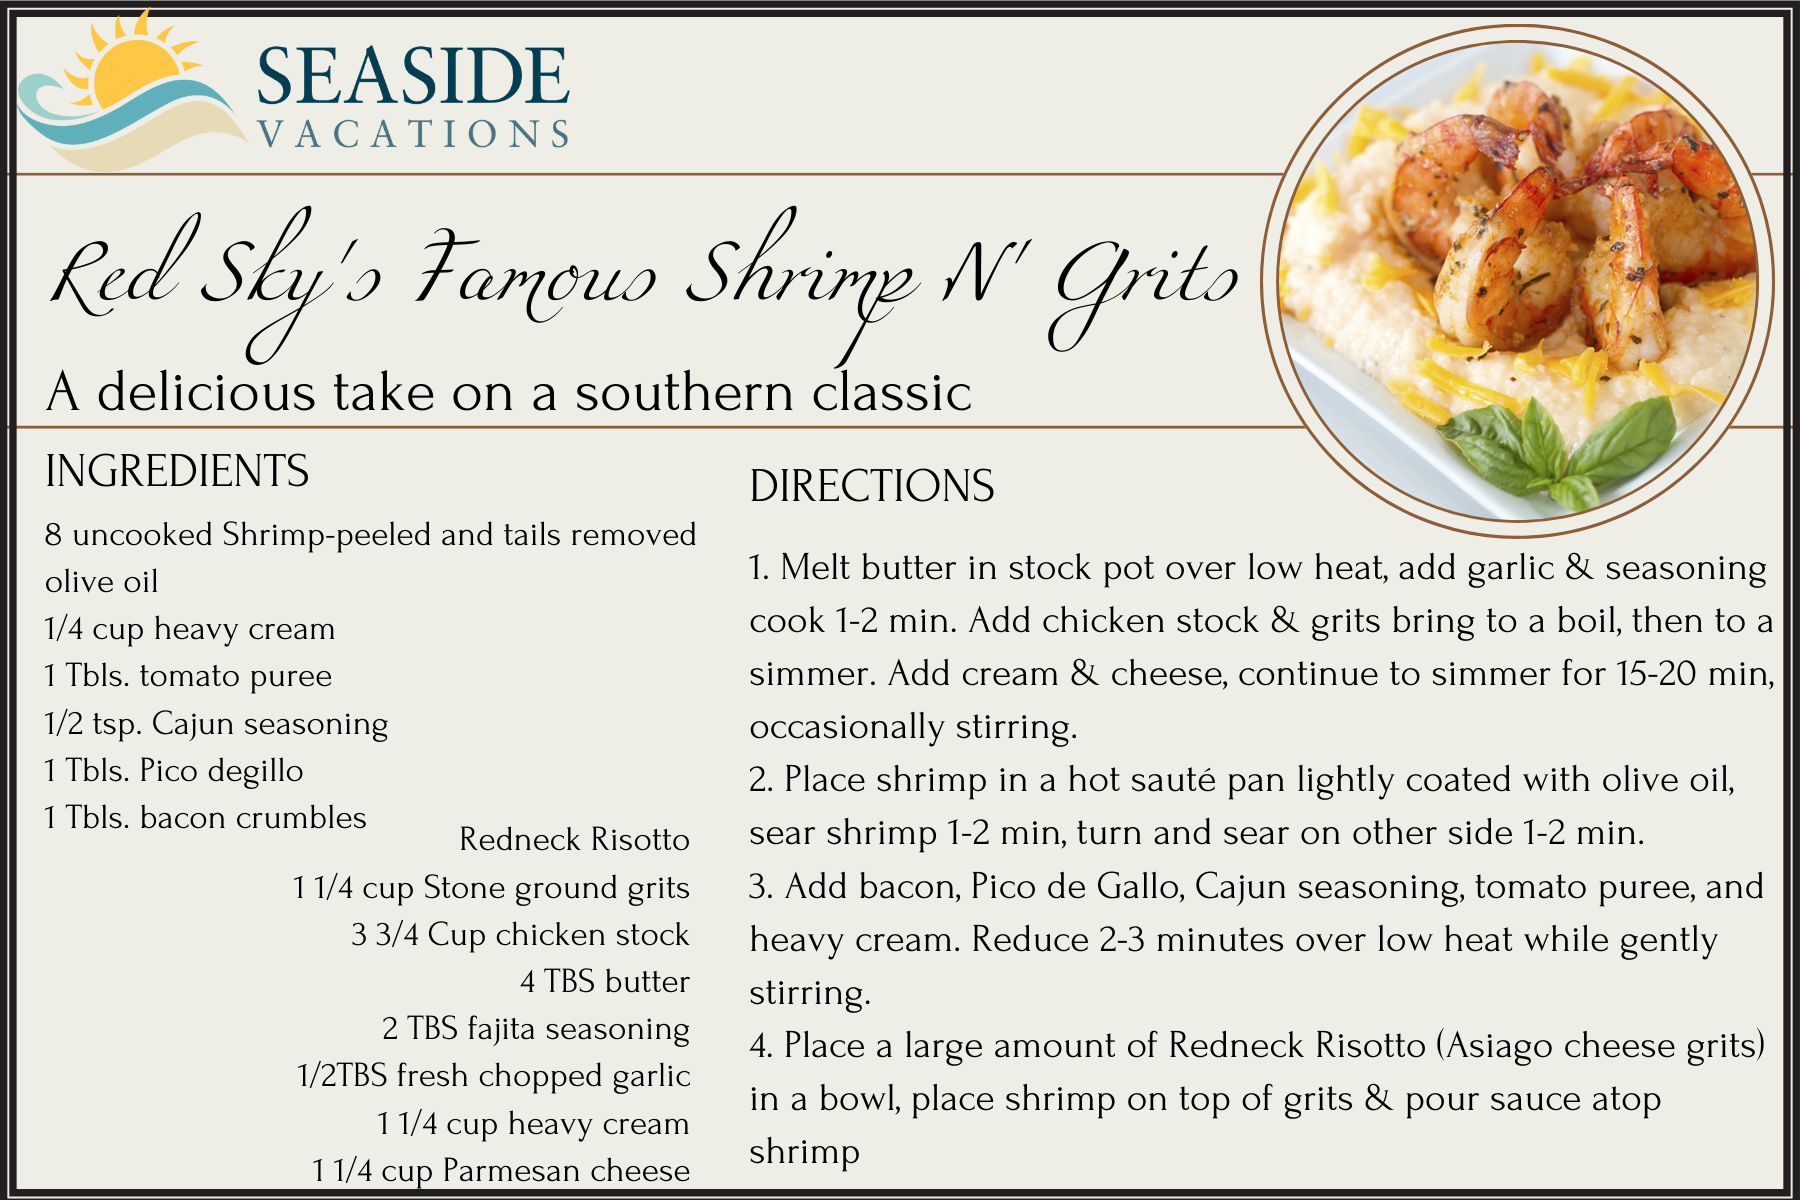 Red Sky's Famous Shrimp N' Grits Recipe Card